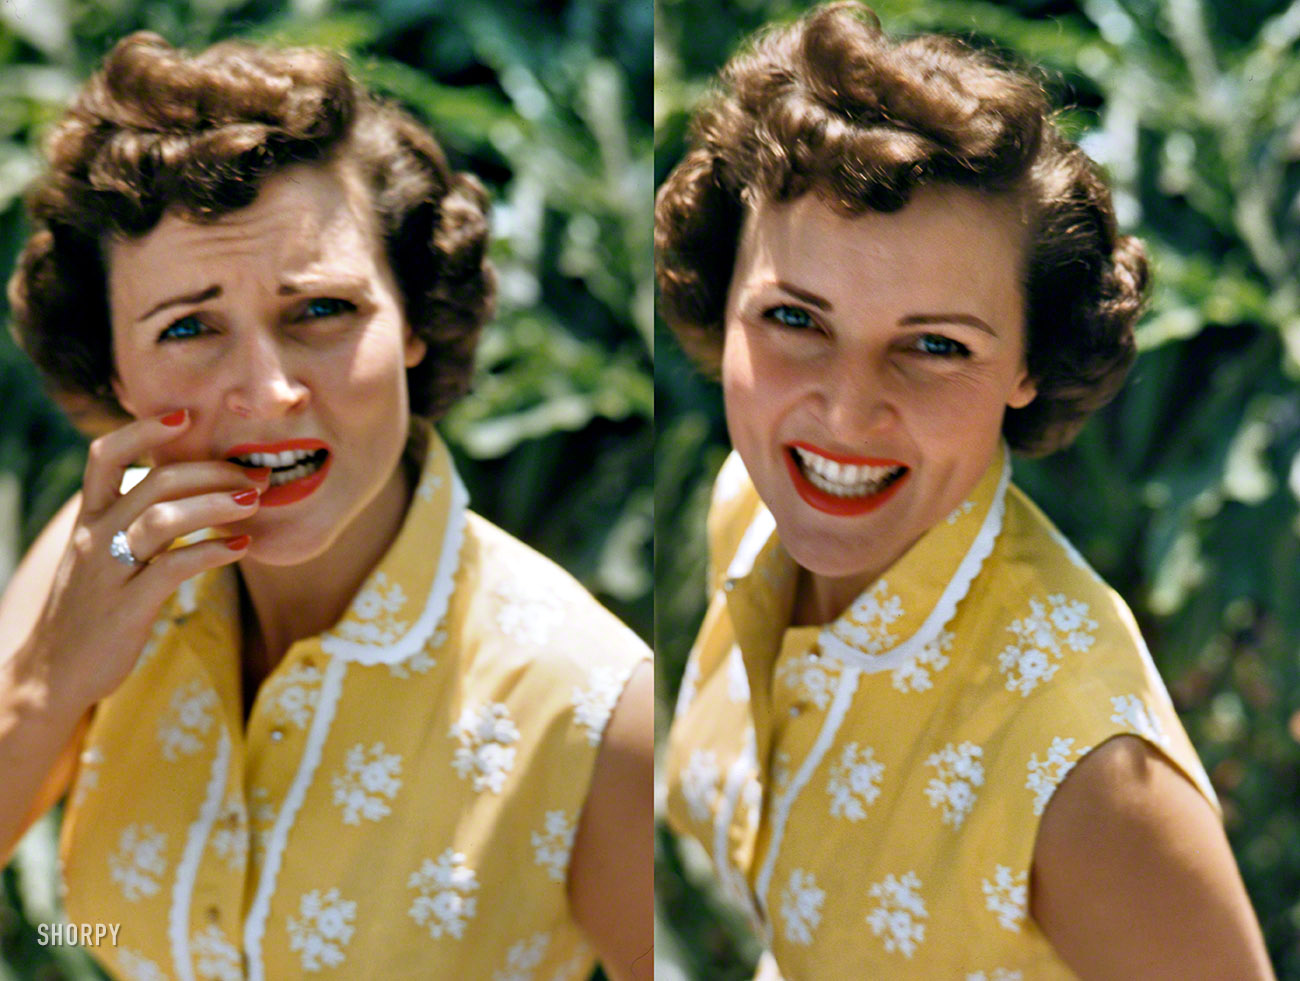 Los Angeles circa 1954. "Actress Betty White rehearsing and performing on her local Los Angeles daytime television show. White ice skating; on a date at a nightclub; at home with her dogs and in her garden; driving her convertible." Photos by Maurice Terrell and Earl Theisen for Look magazine. View full size.